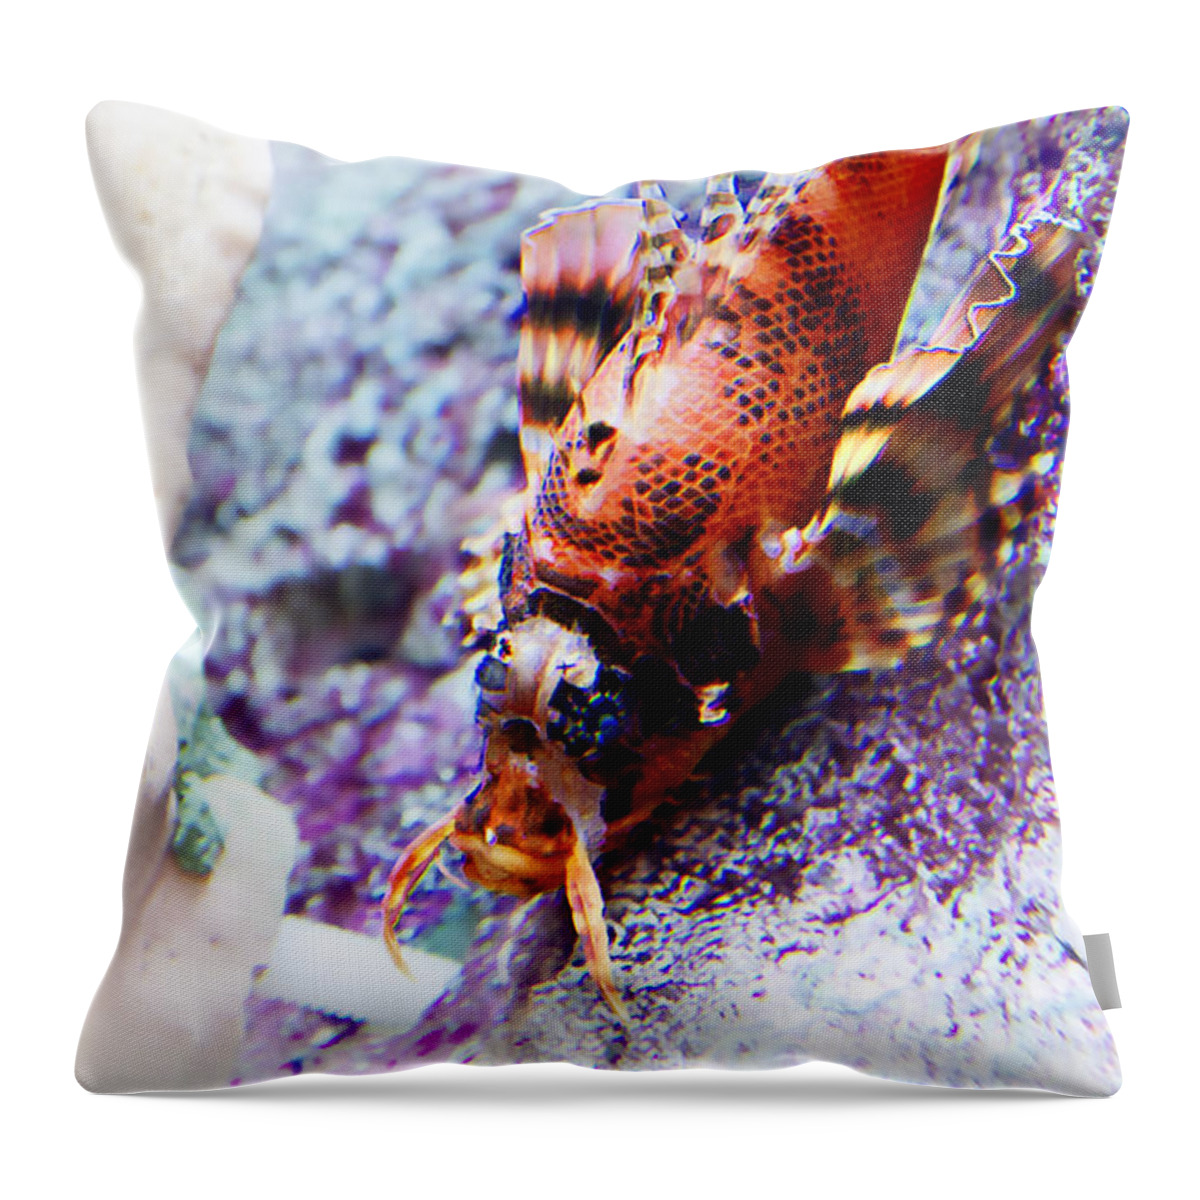 Ocean Throw Pillow featuring the photograph Dressed Up... by Milena Ilieva